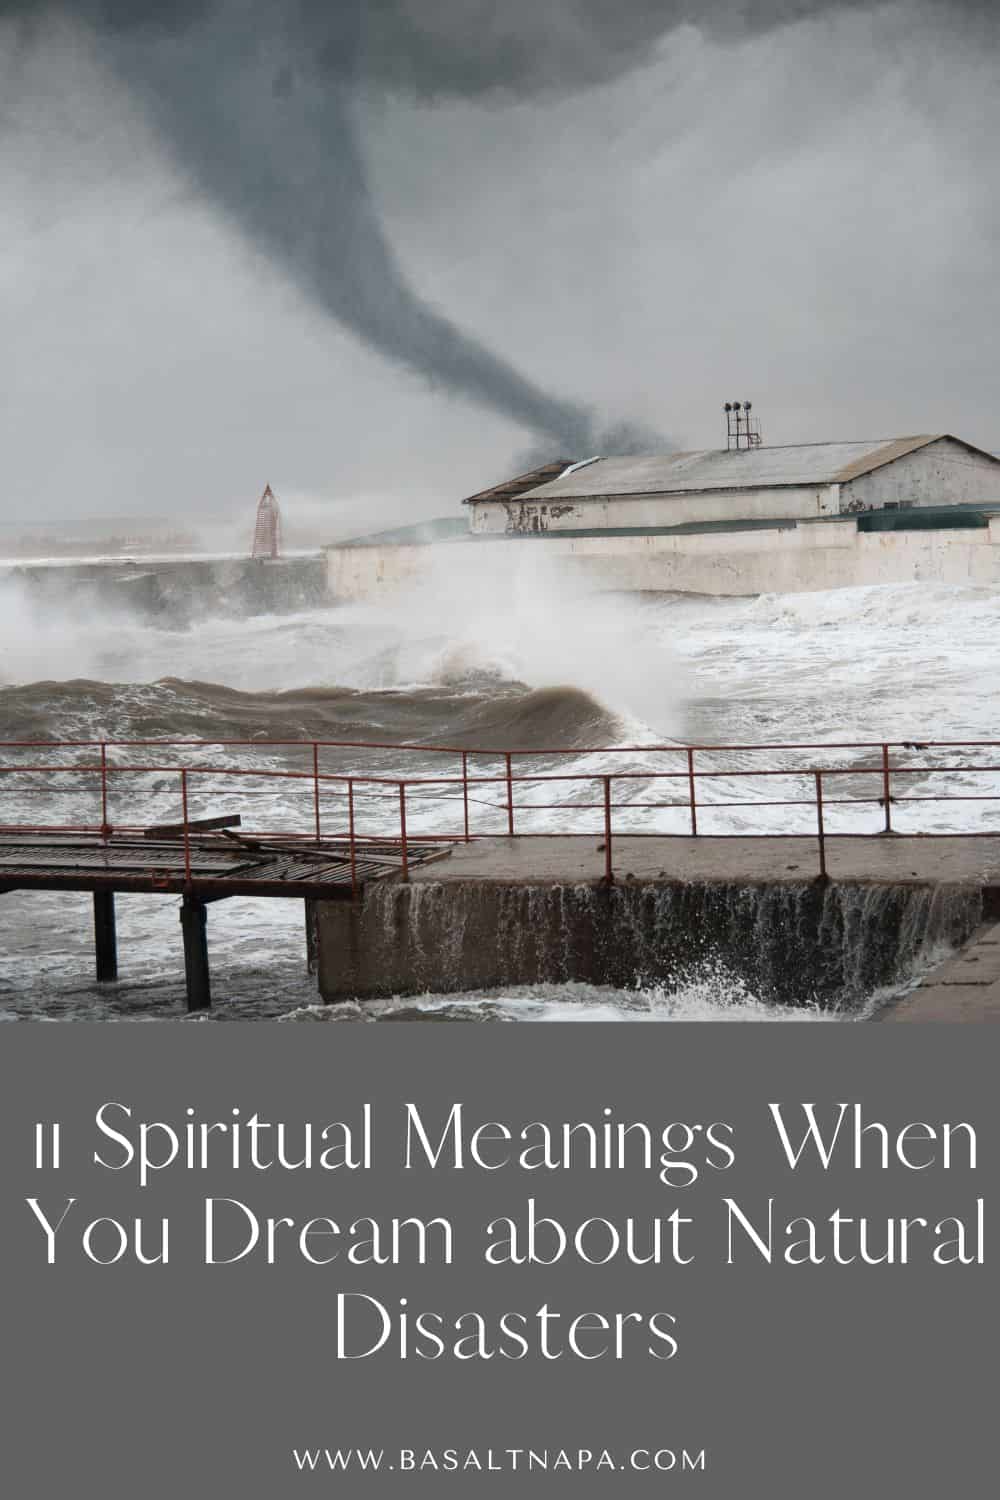 11 Spiritual Meanings When You Dream about Natural Disasters